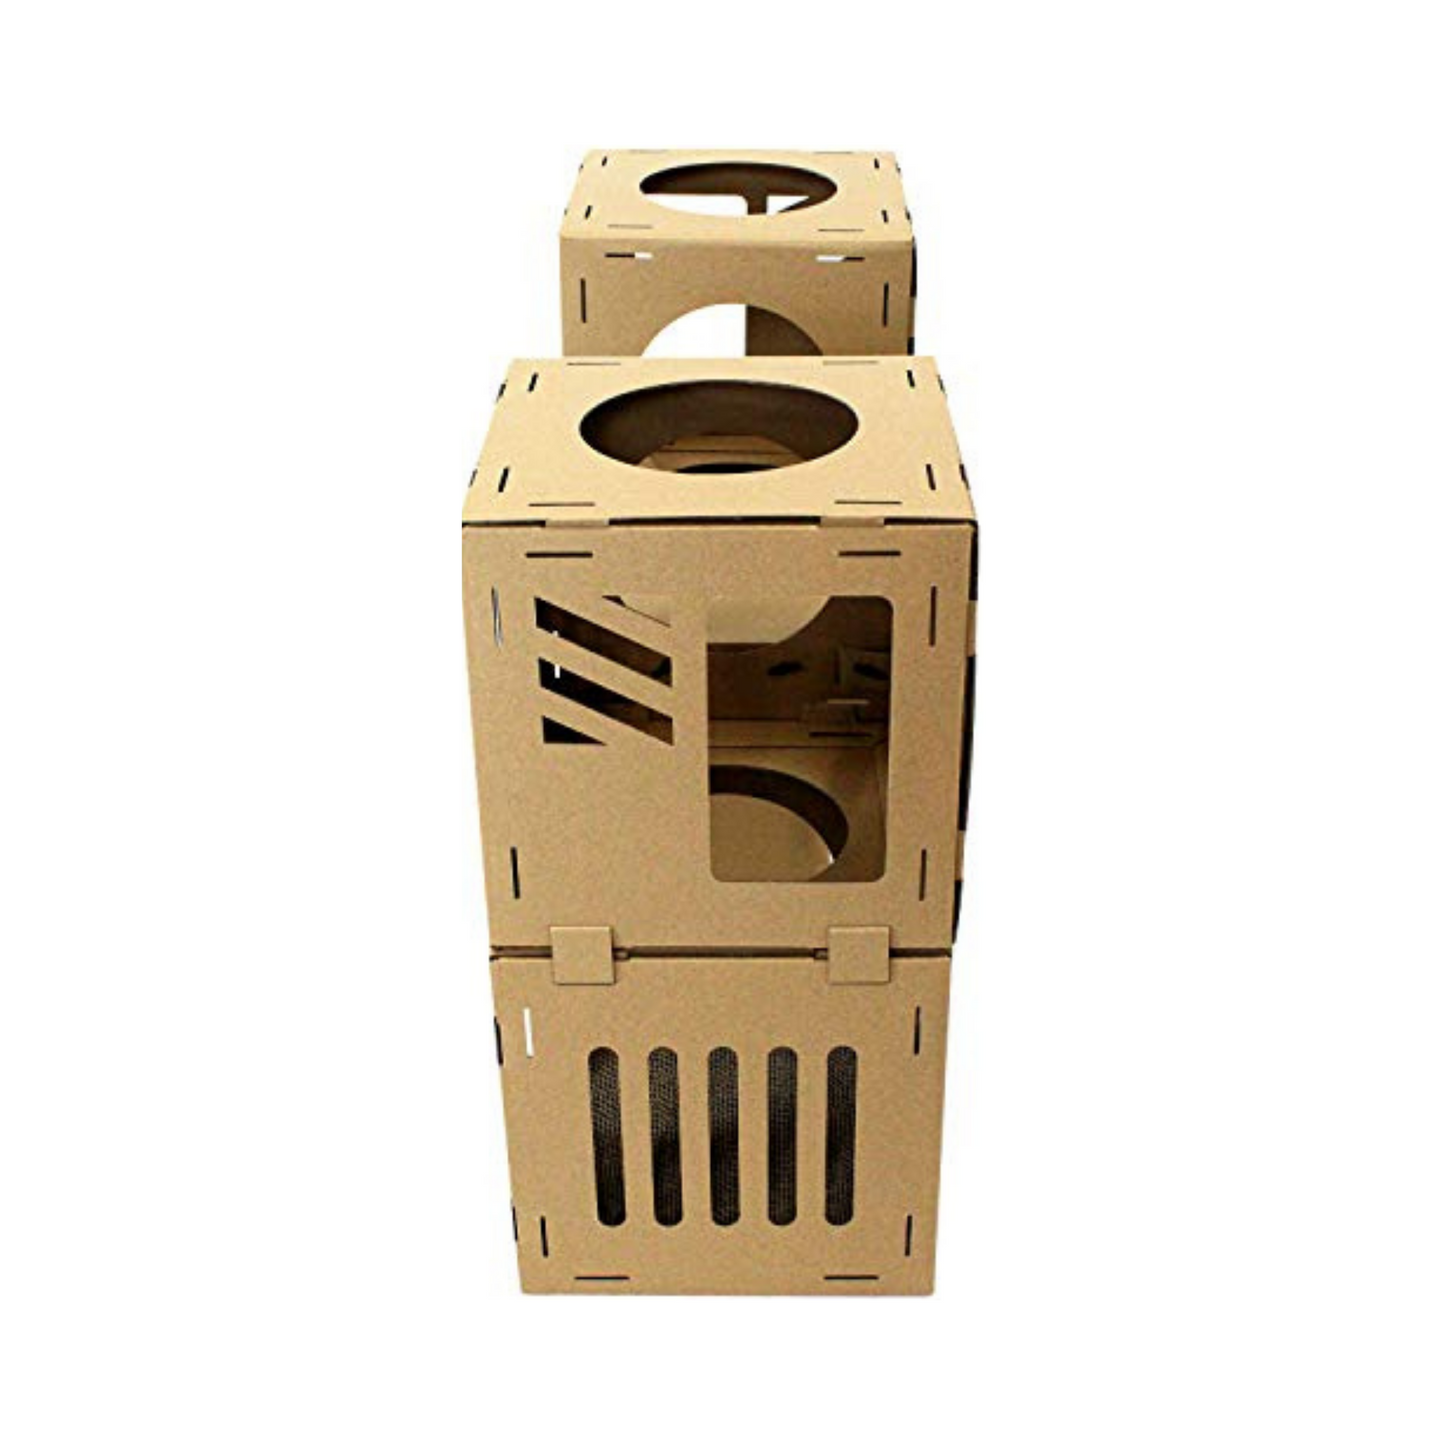 Midlee Cardboard Cat Climbing House Furniture- 2 Tower w/Scratching Pads